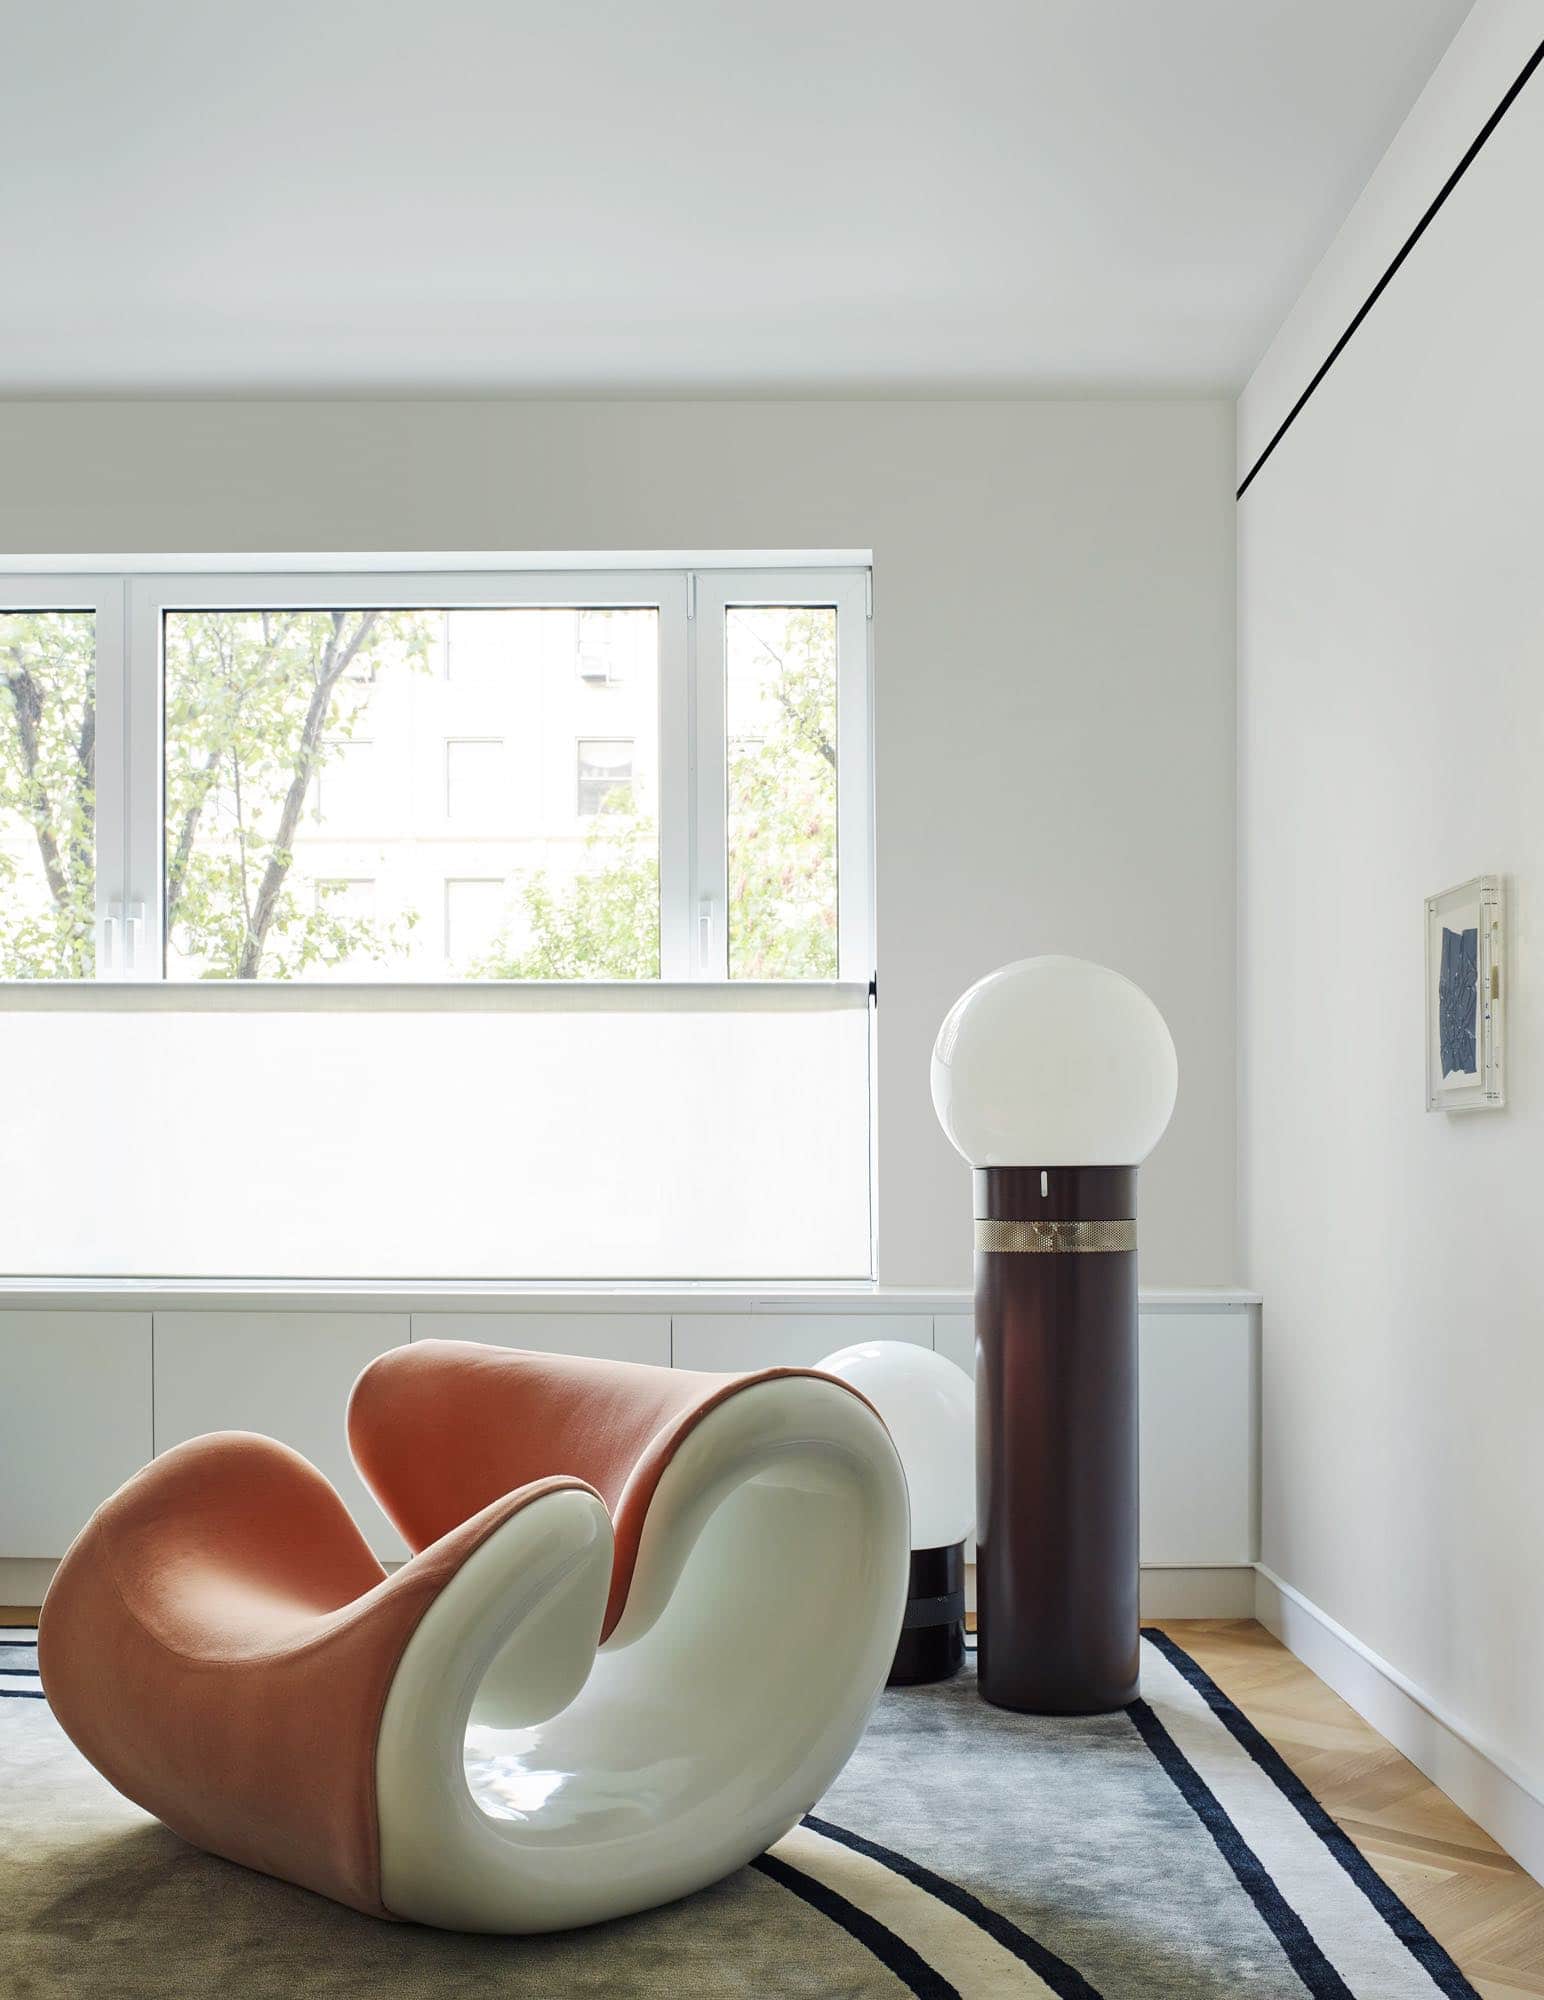 This photograph shows a detail shot from a Park Avenue living room designed by Carol Egan.  There is a 1970s Esox Chair by Jean-Pierre Laporte, experimental and sculpturally formed chair in white fiberglass frame with a powder pink Mohair upholstery.  Next to this playful chairs are Orocolo floor lamps by Gae Aulenti, one tall, one low.  An artwork by Gabriel de la Mora called Collage: "Ultramarine Blue" is hung on the adjacent wall.